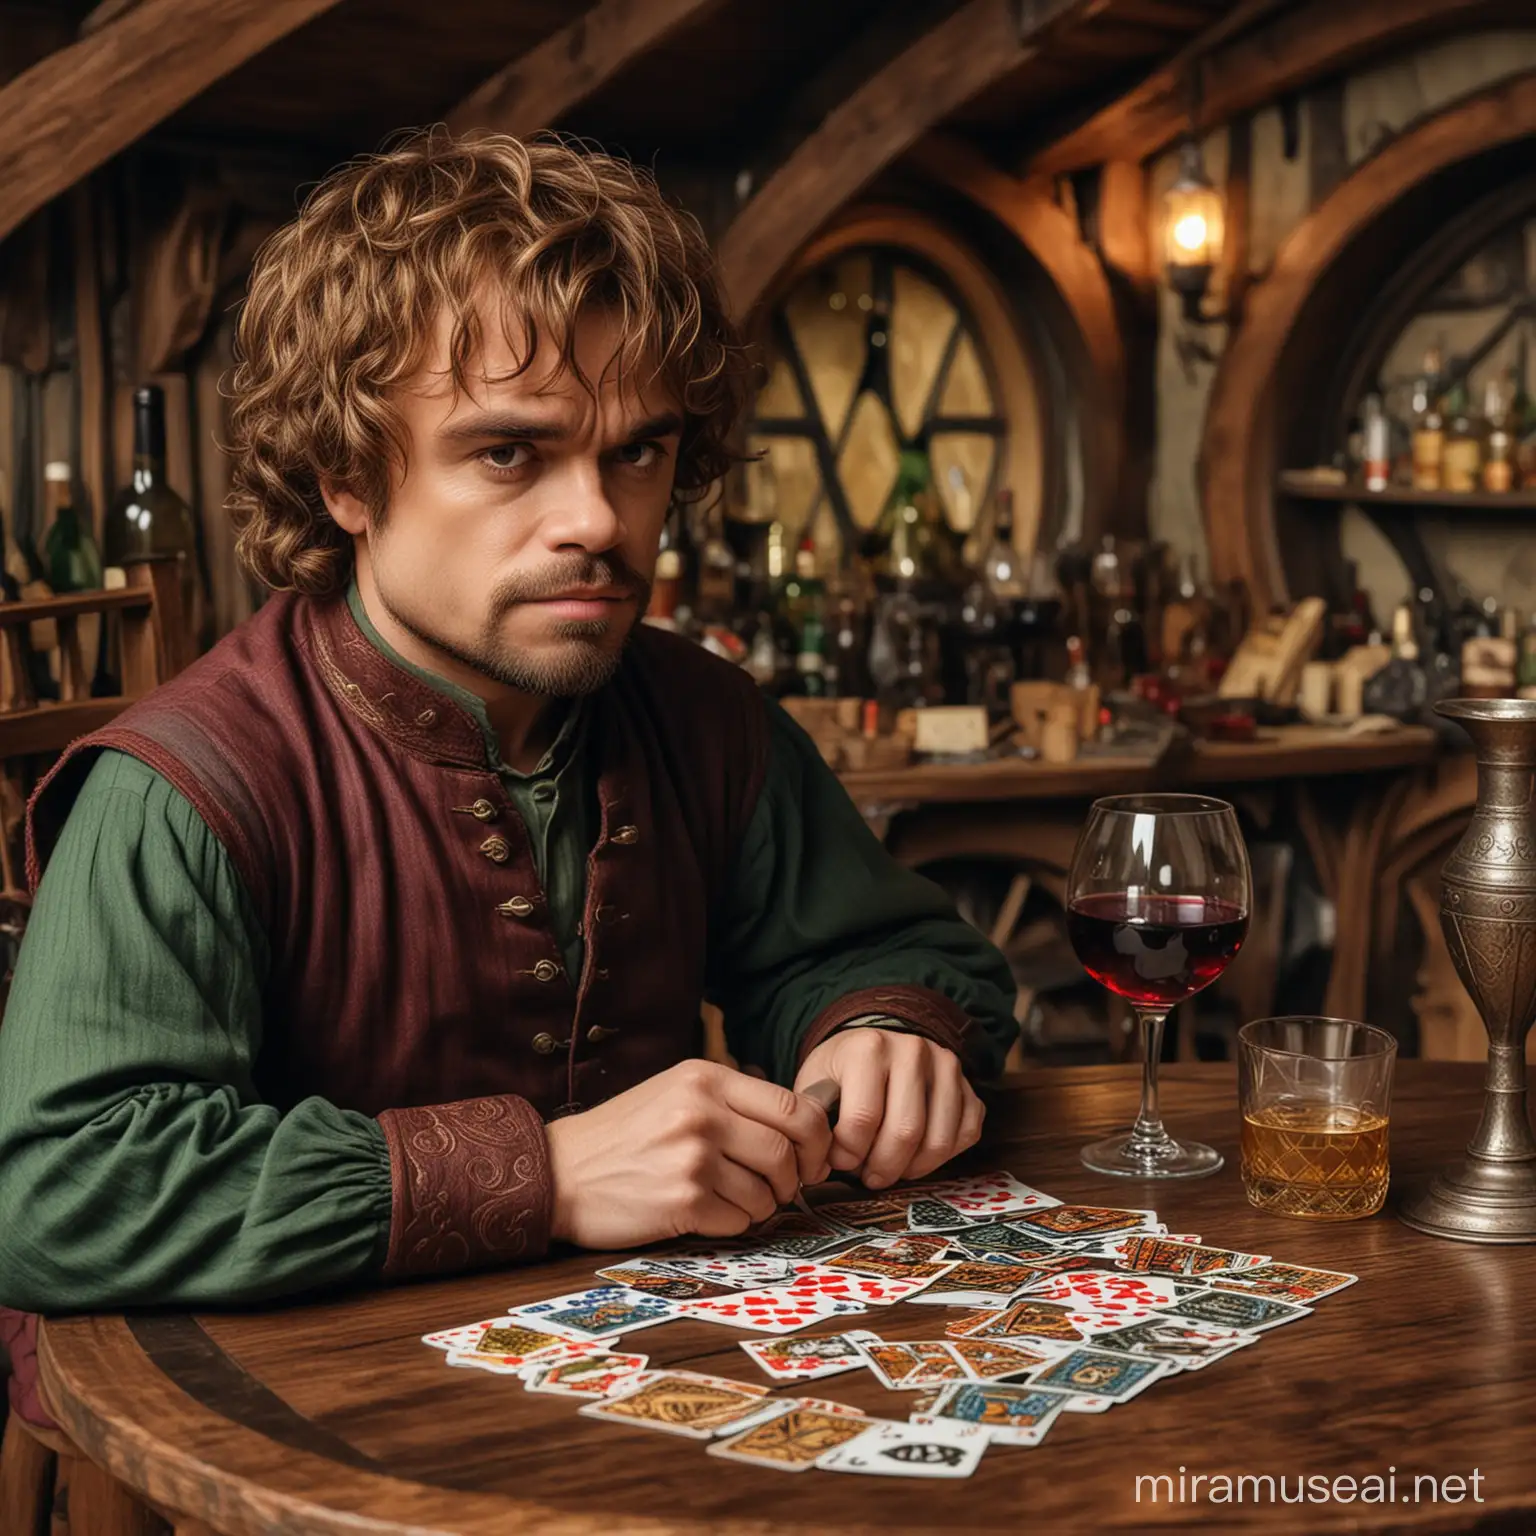 Tyrion Lannister Drinking Wine and Playing Cards with Frodo Baggins in a Cozy Hobbit House